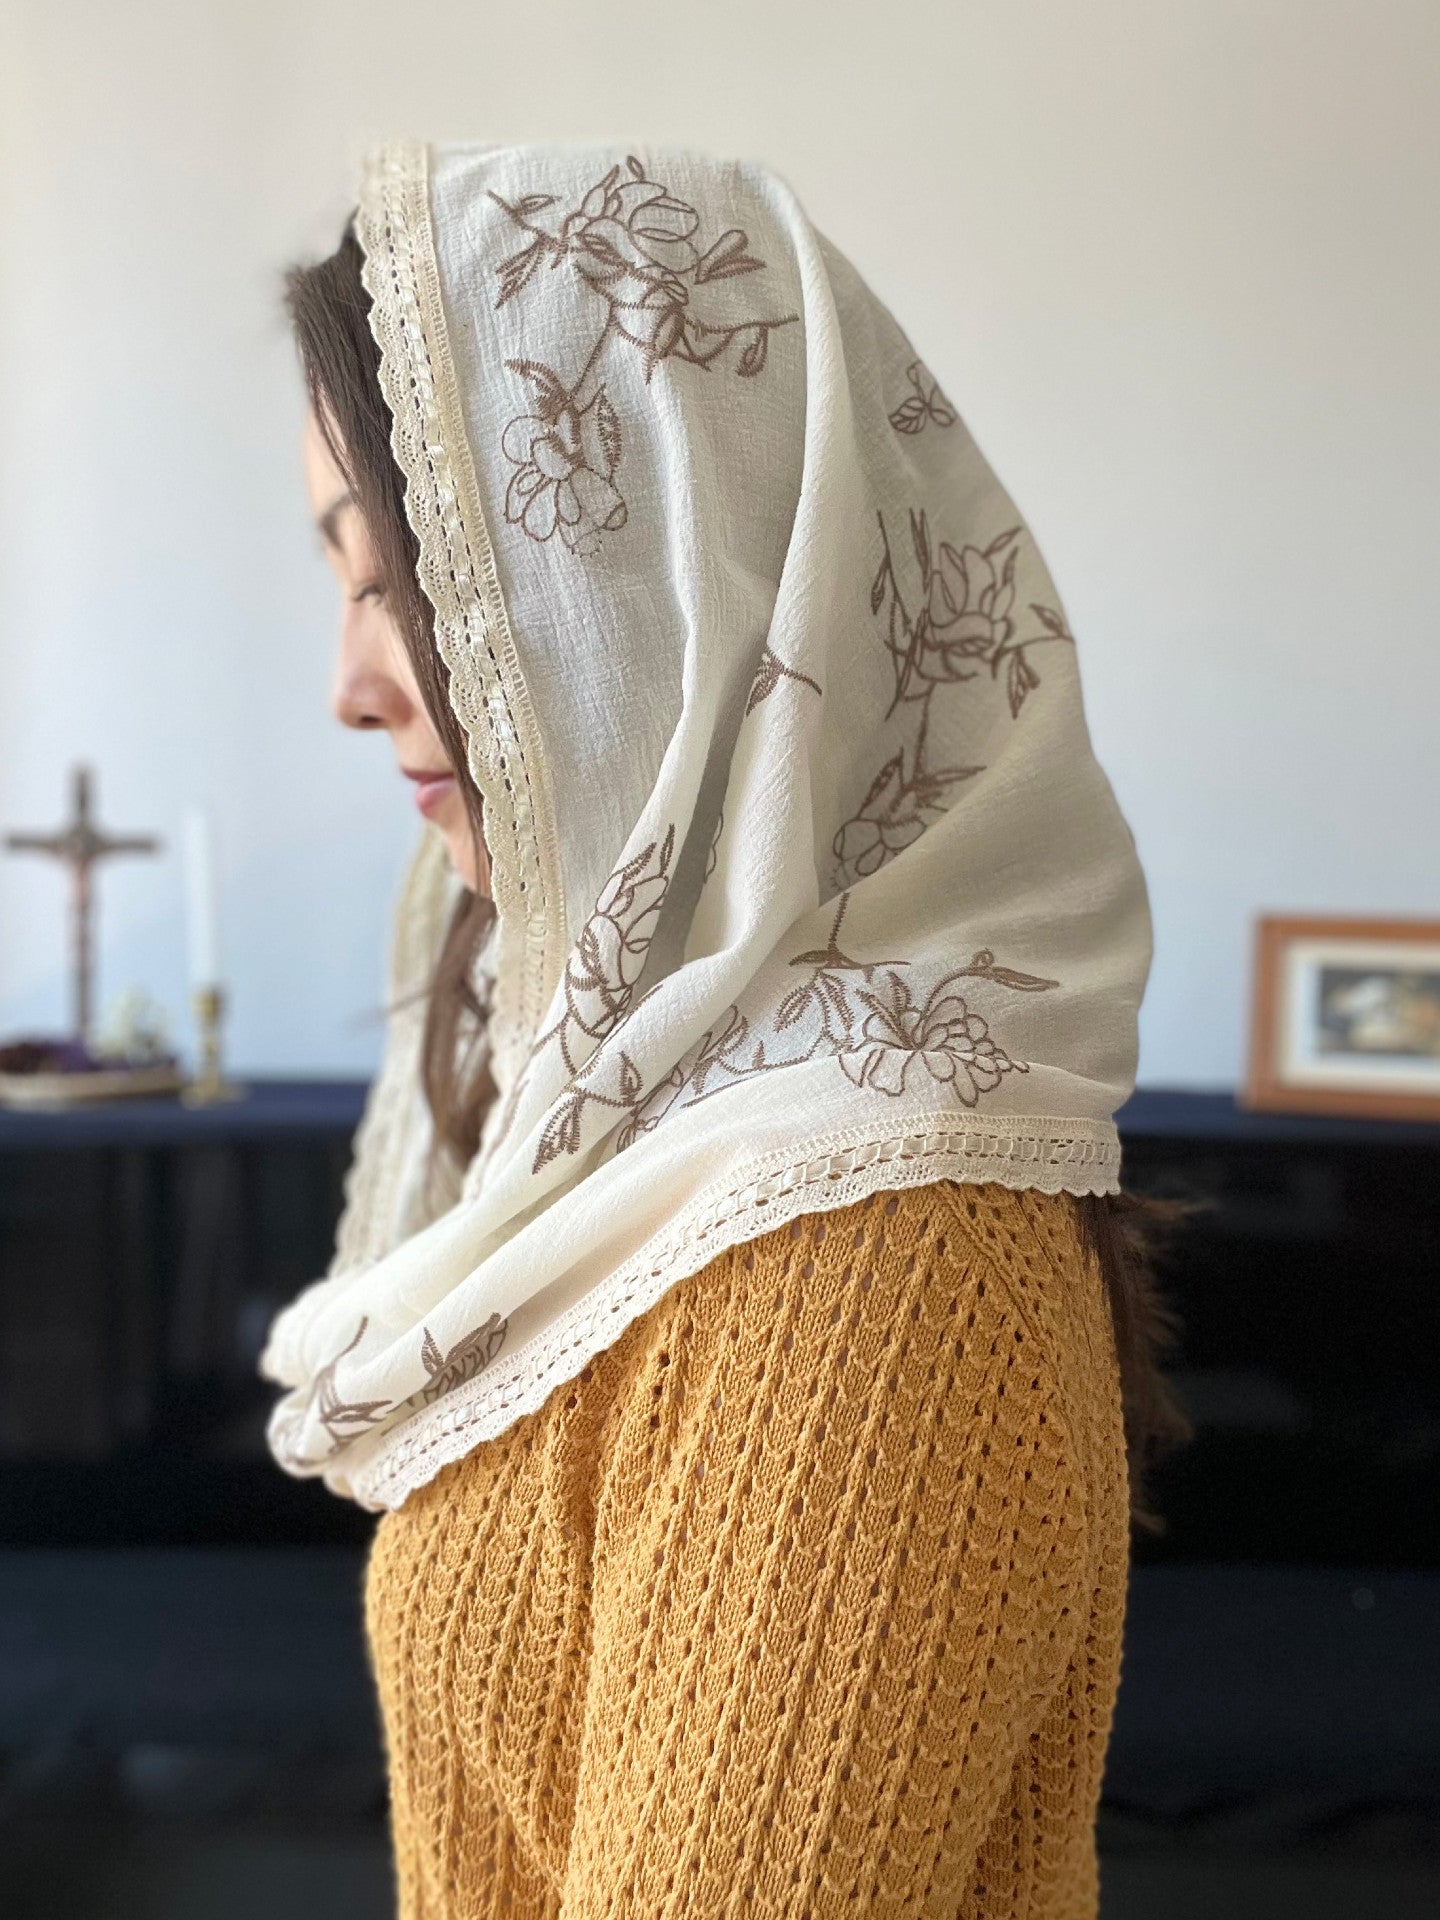 St. Monica Cotton Triangle Veils - Veils by Lily